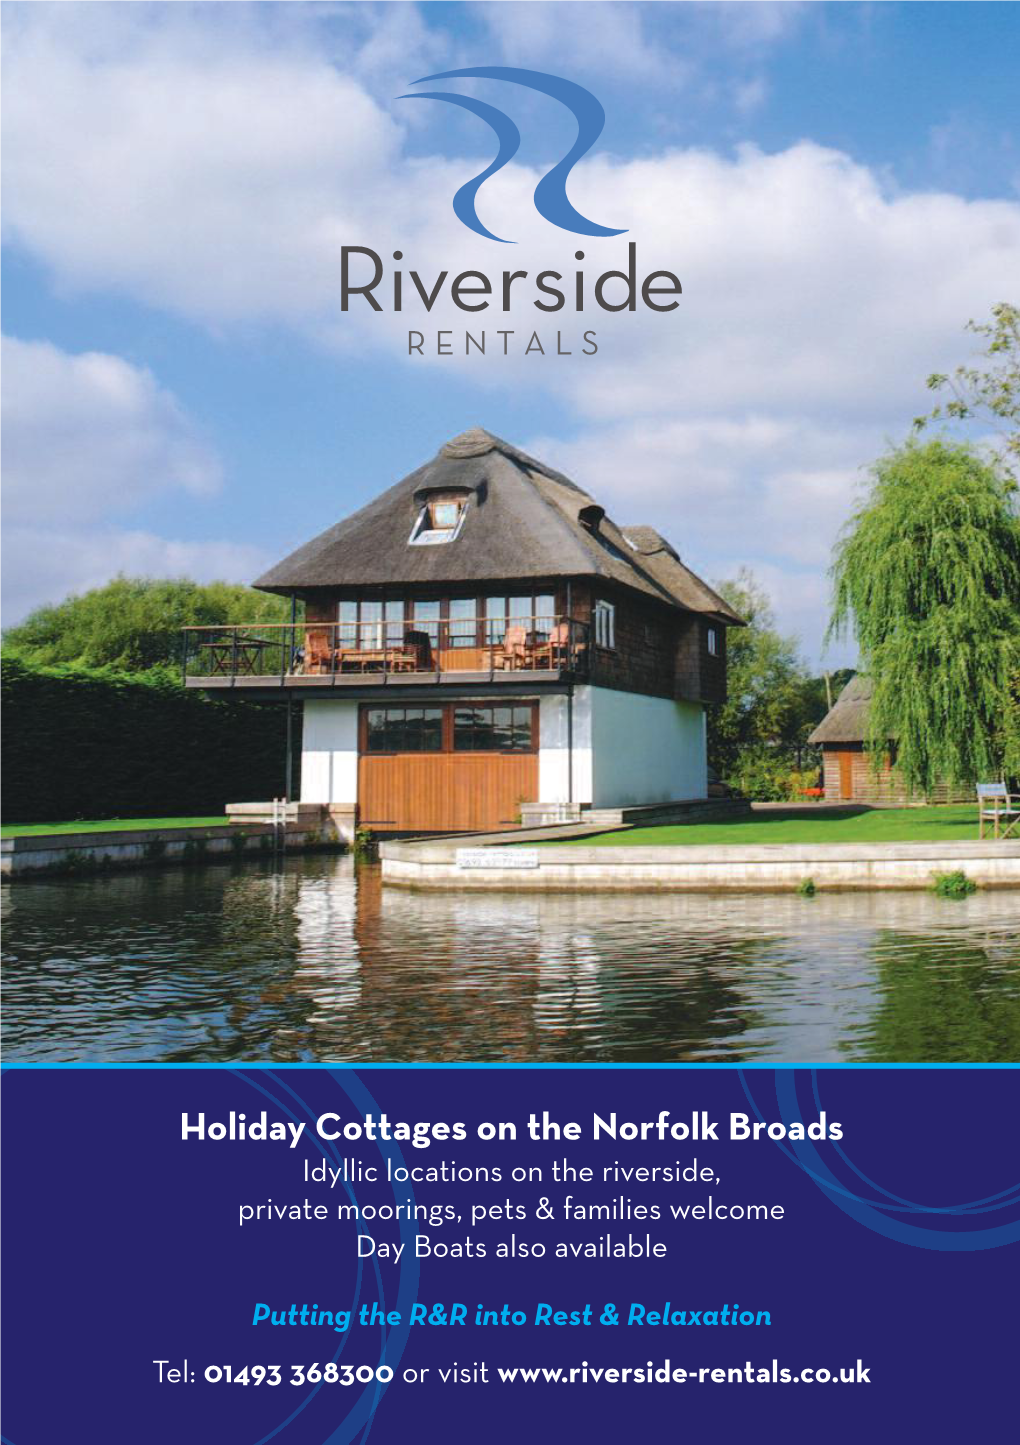 Holiday Cottages on the Norfolk Broads Idyllic Locations on the Riverside, Private Moorings, Pets & Families Welcome Day Boats Also Available